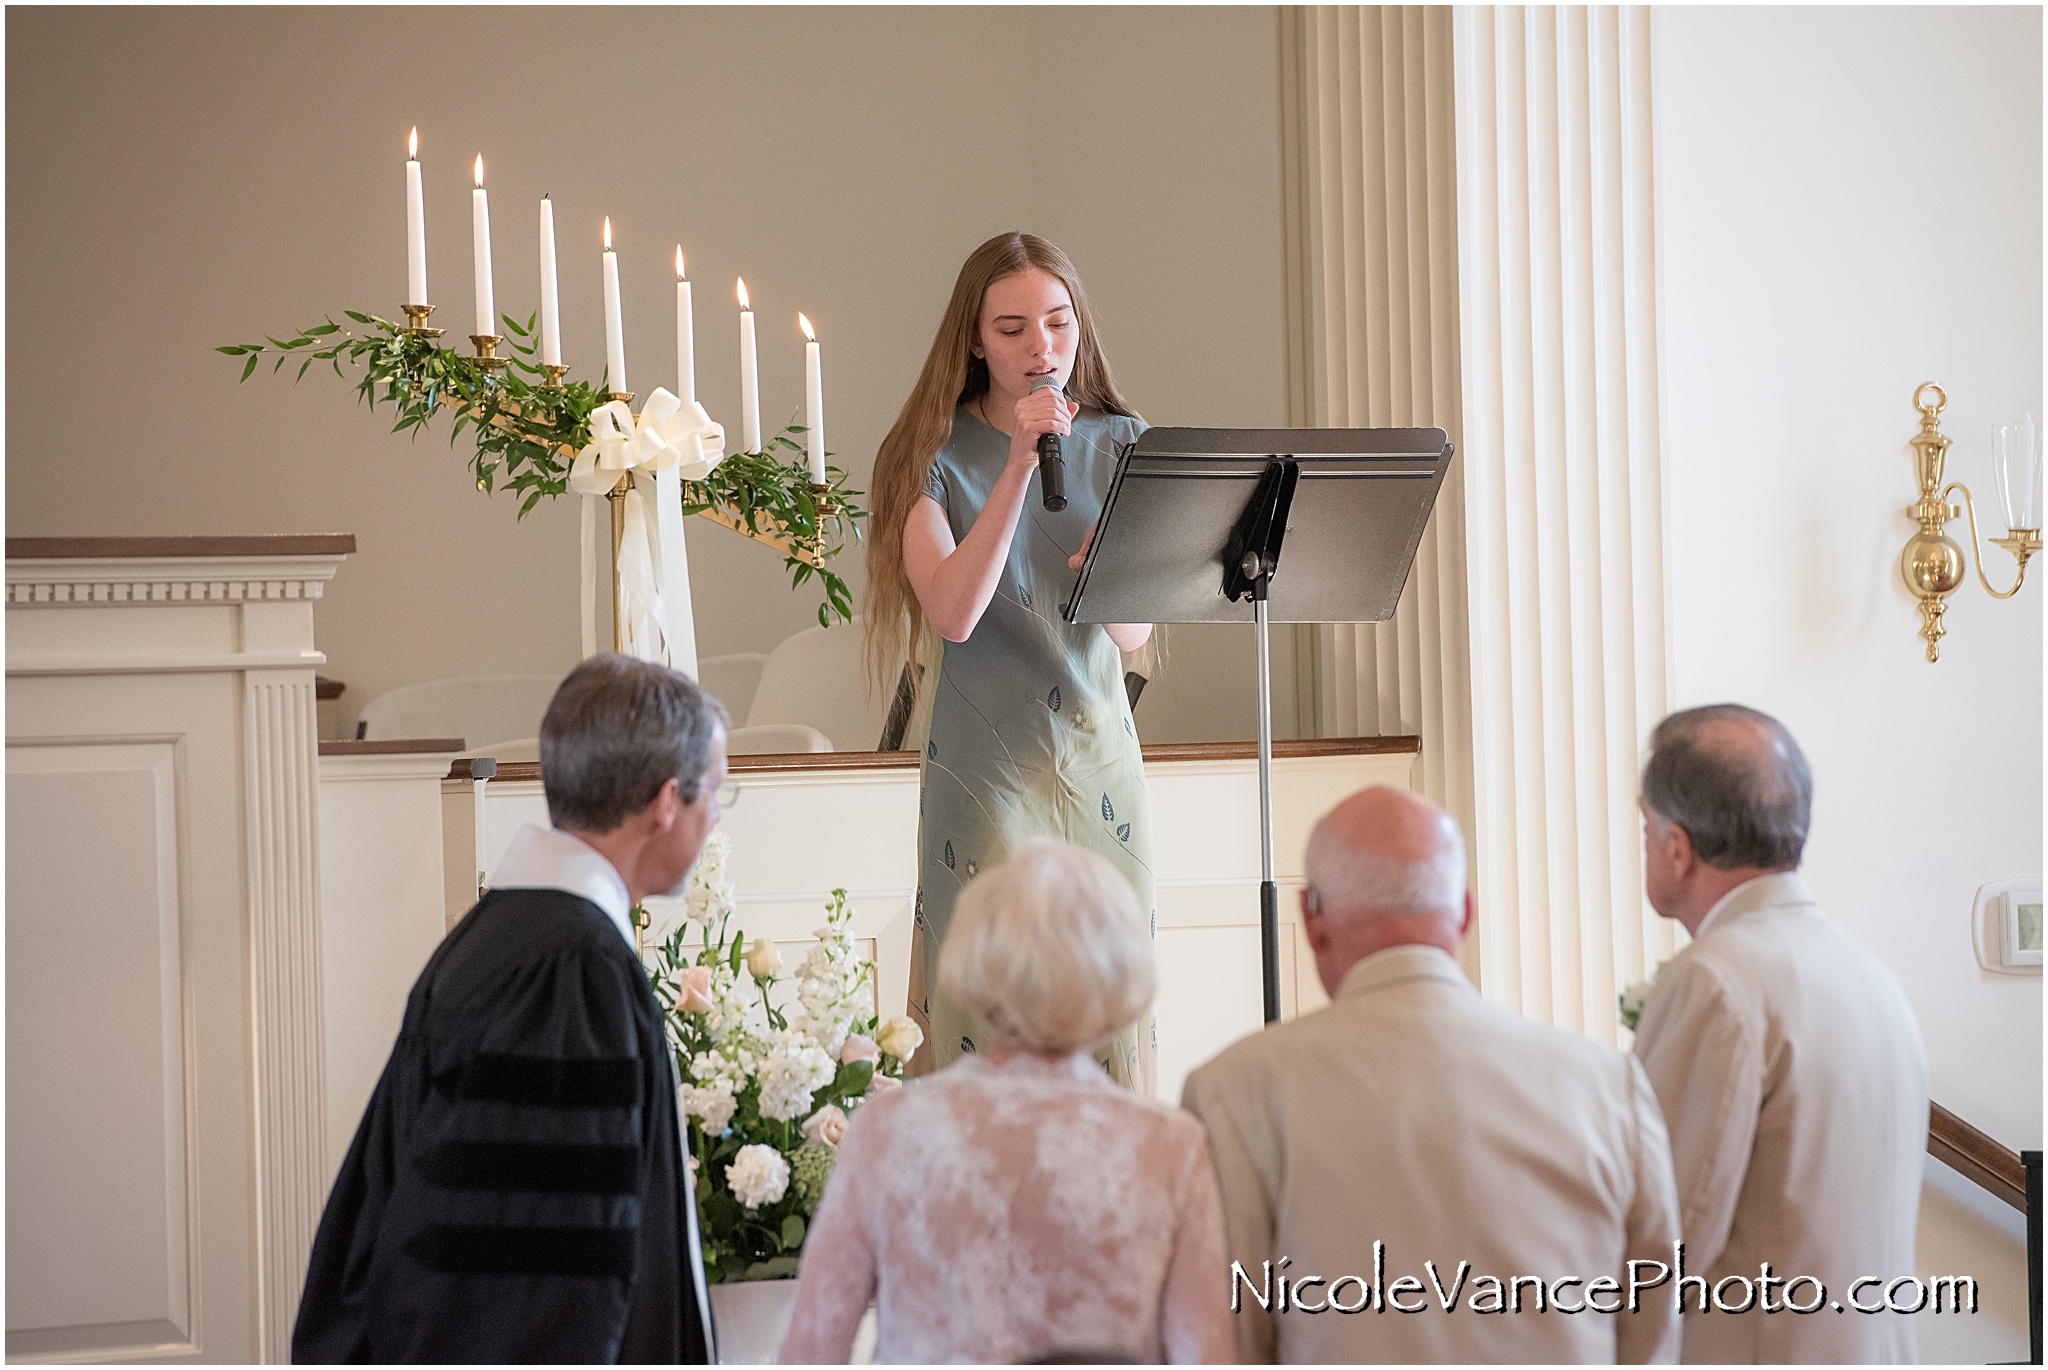 Hymn performed during the wedding ceremony at Crestwood Presbyterian Church in Richmond VA